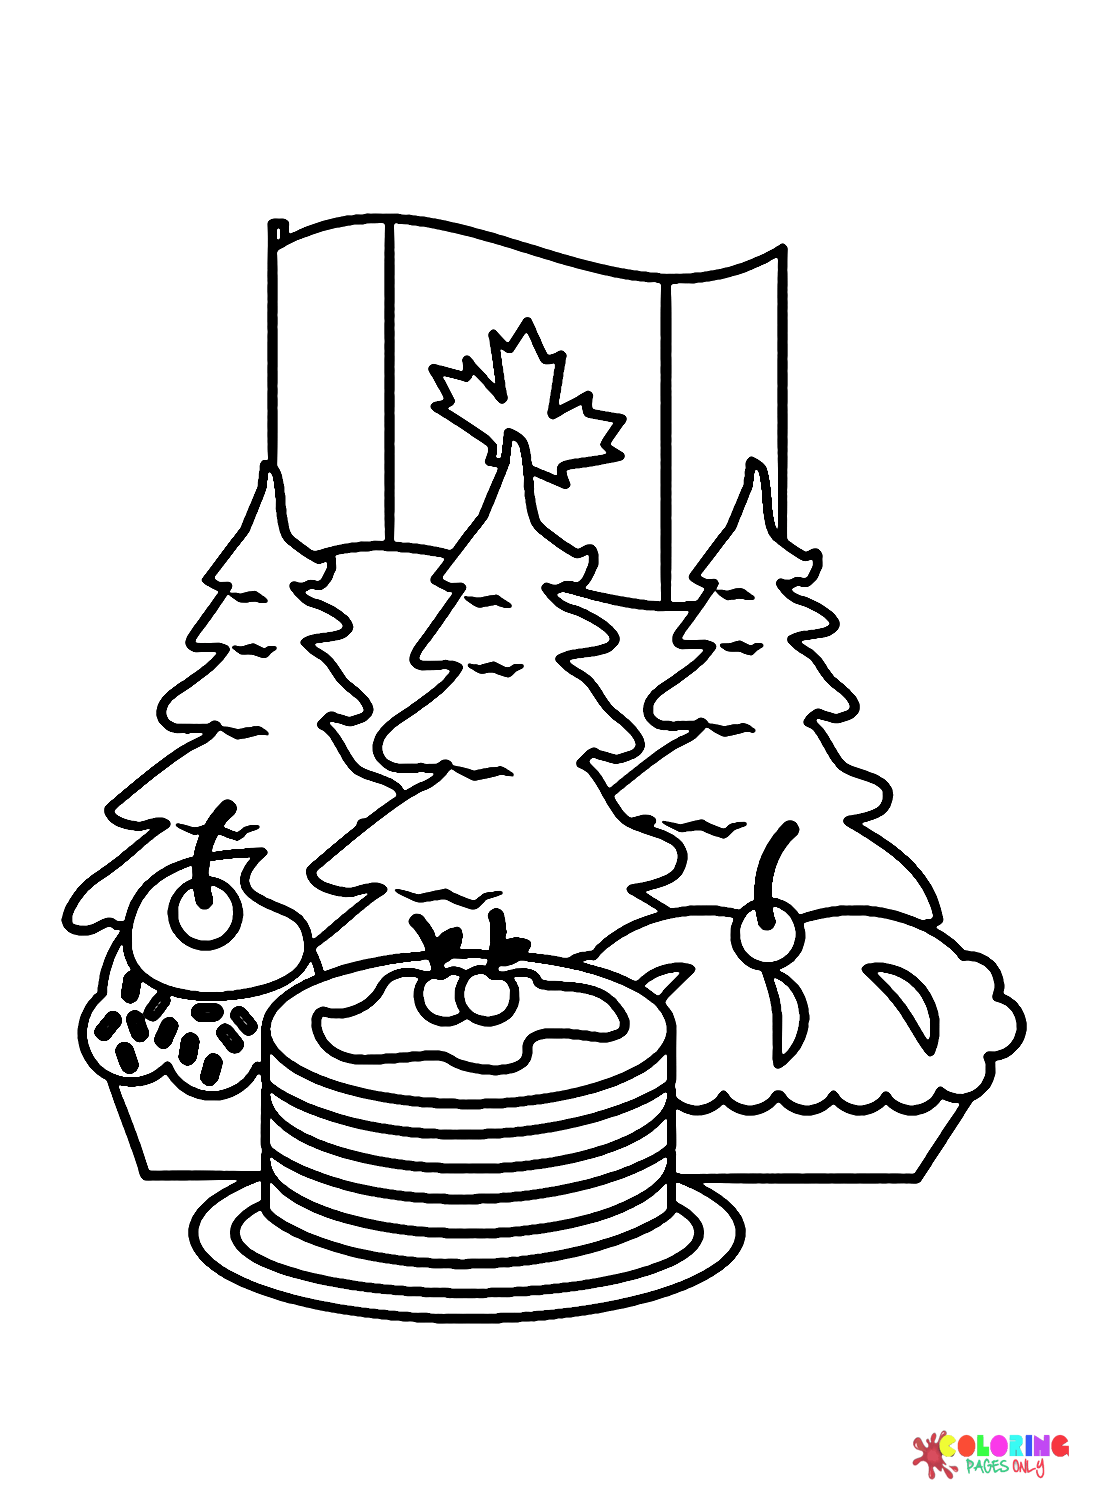 Trees with Cake and Flag in Canada Day from Canada Day